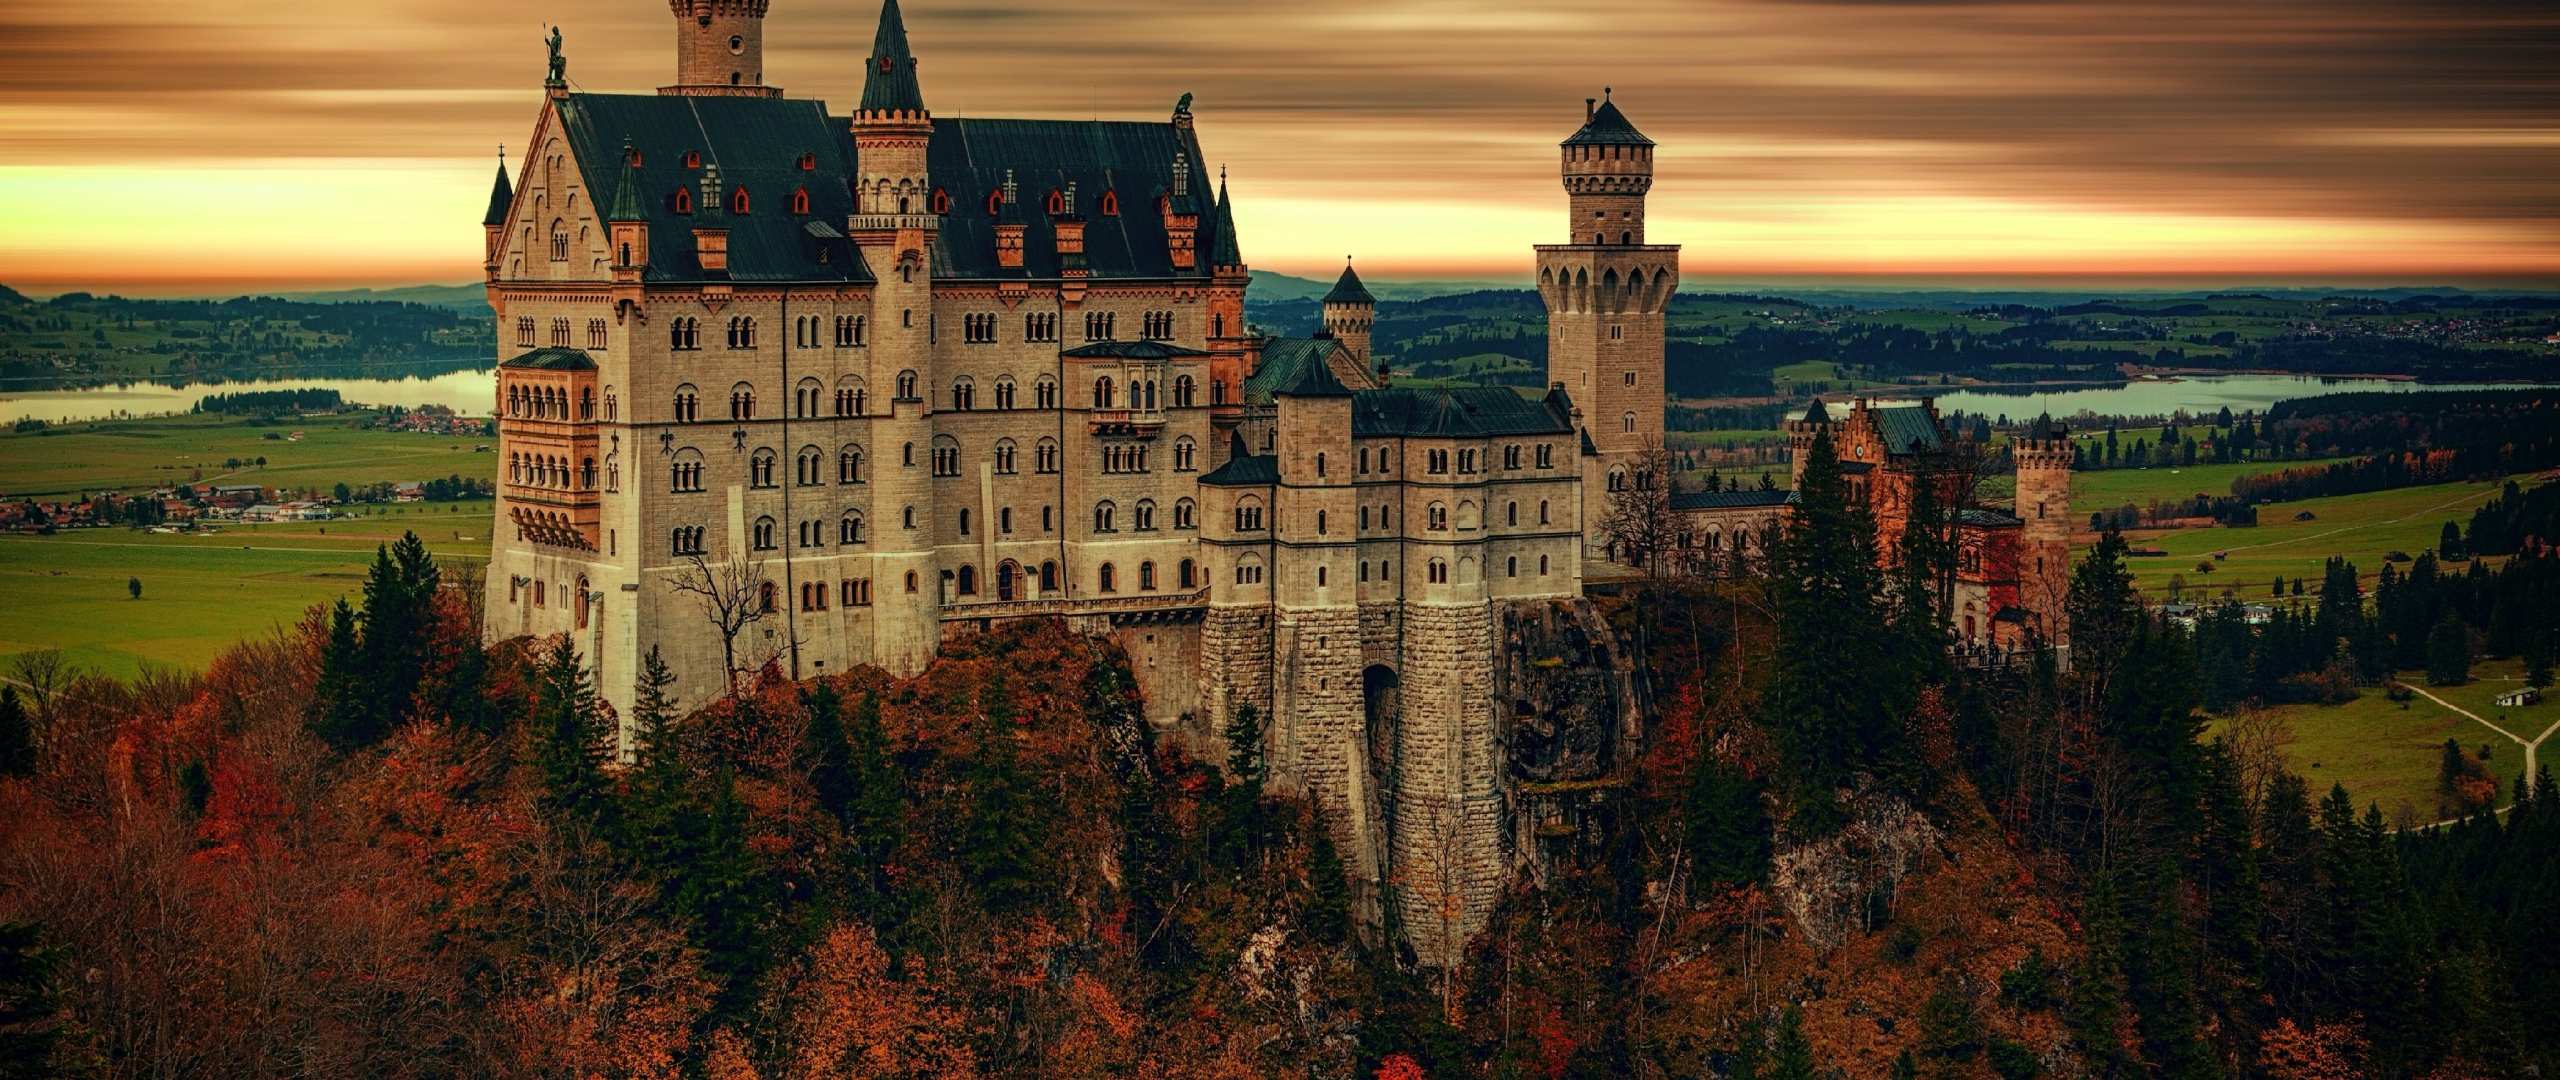 Download 2560x1080 wallpaper castle, old architecture, tree, sunset, dual wide, widescreen ...